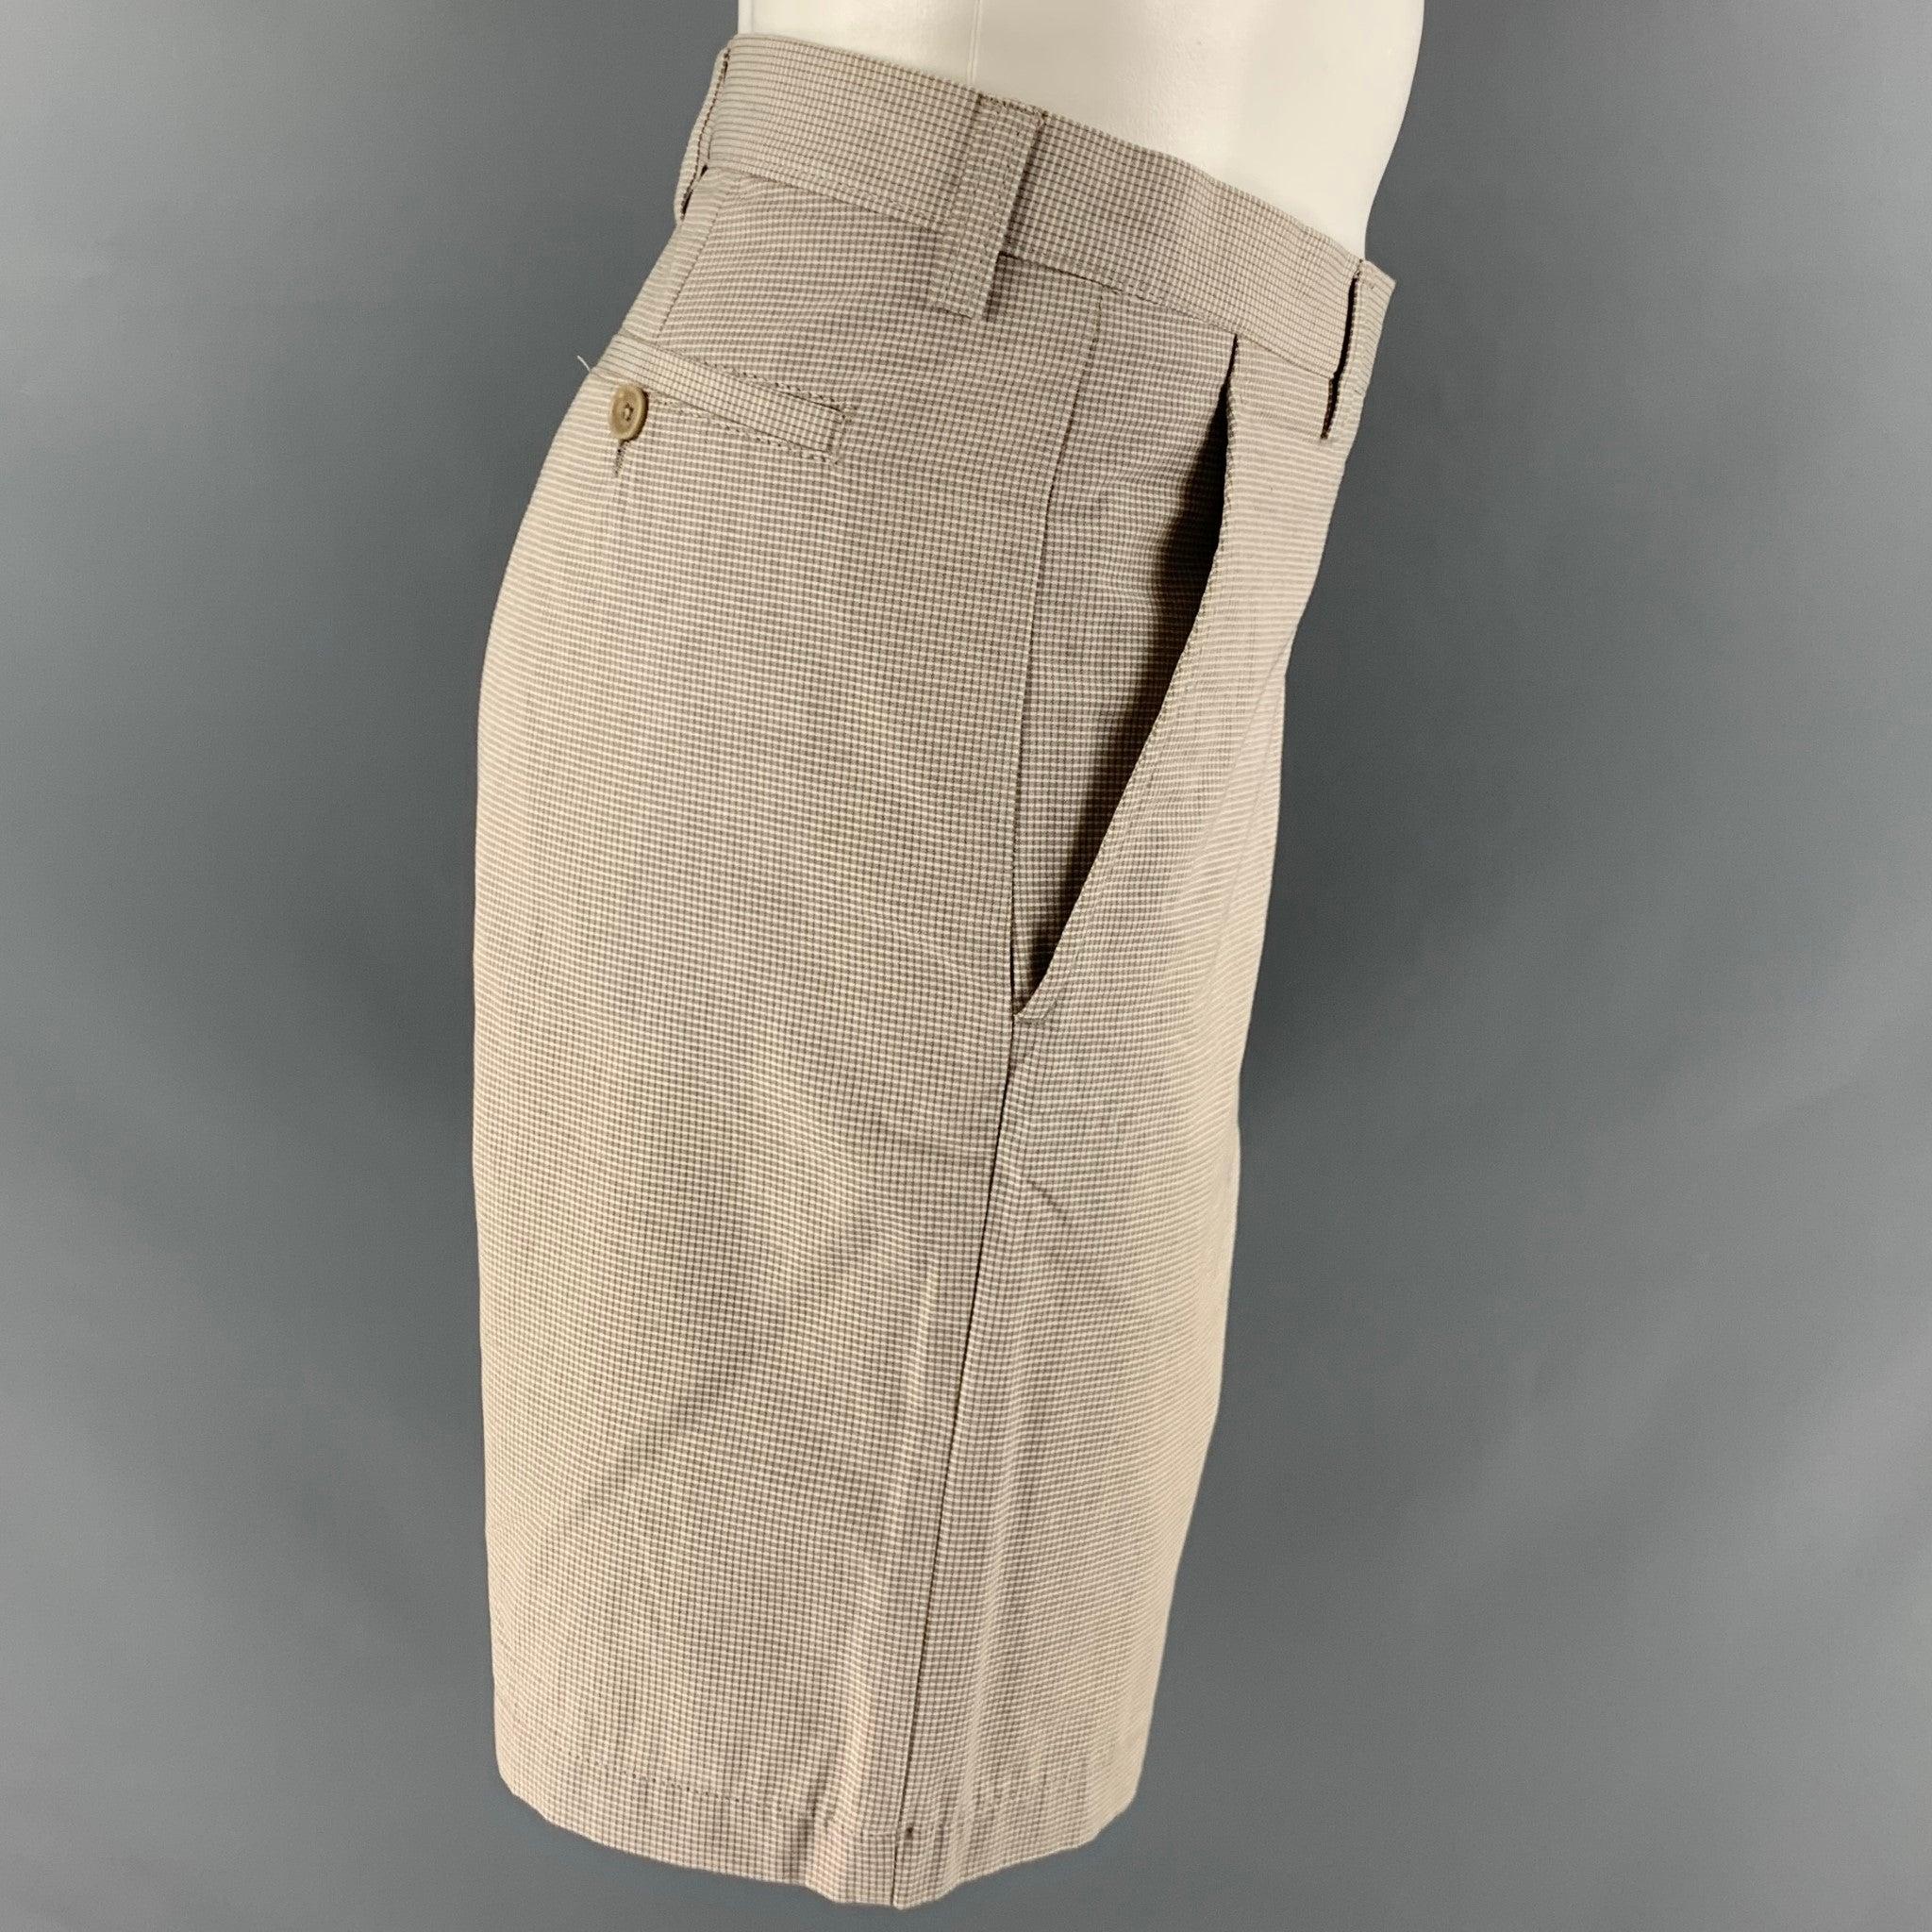 ETRO Size 32 Khaki Window Pane Cotton Shorts In Excellent Condition For Sale In San Francisco, CA